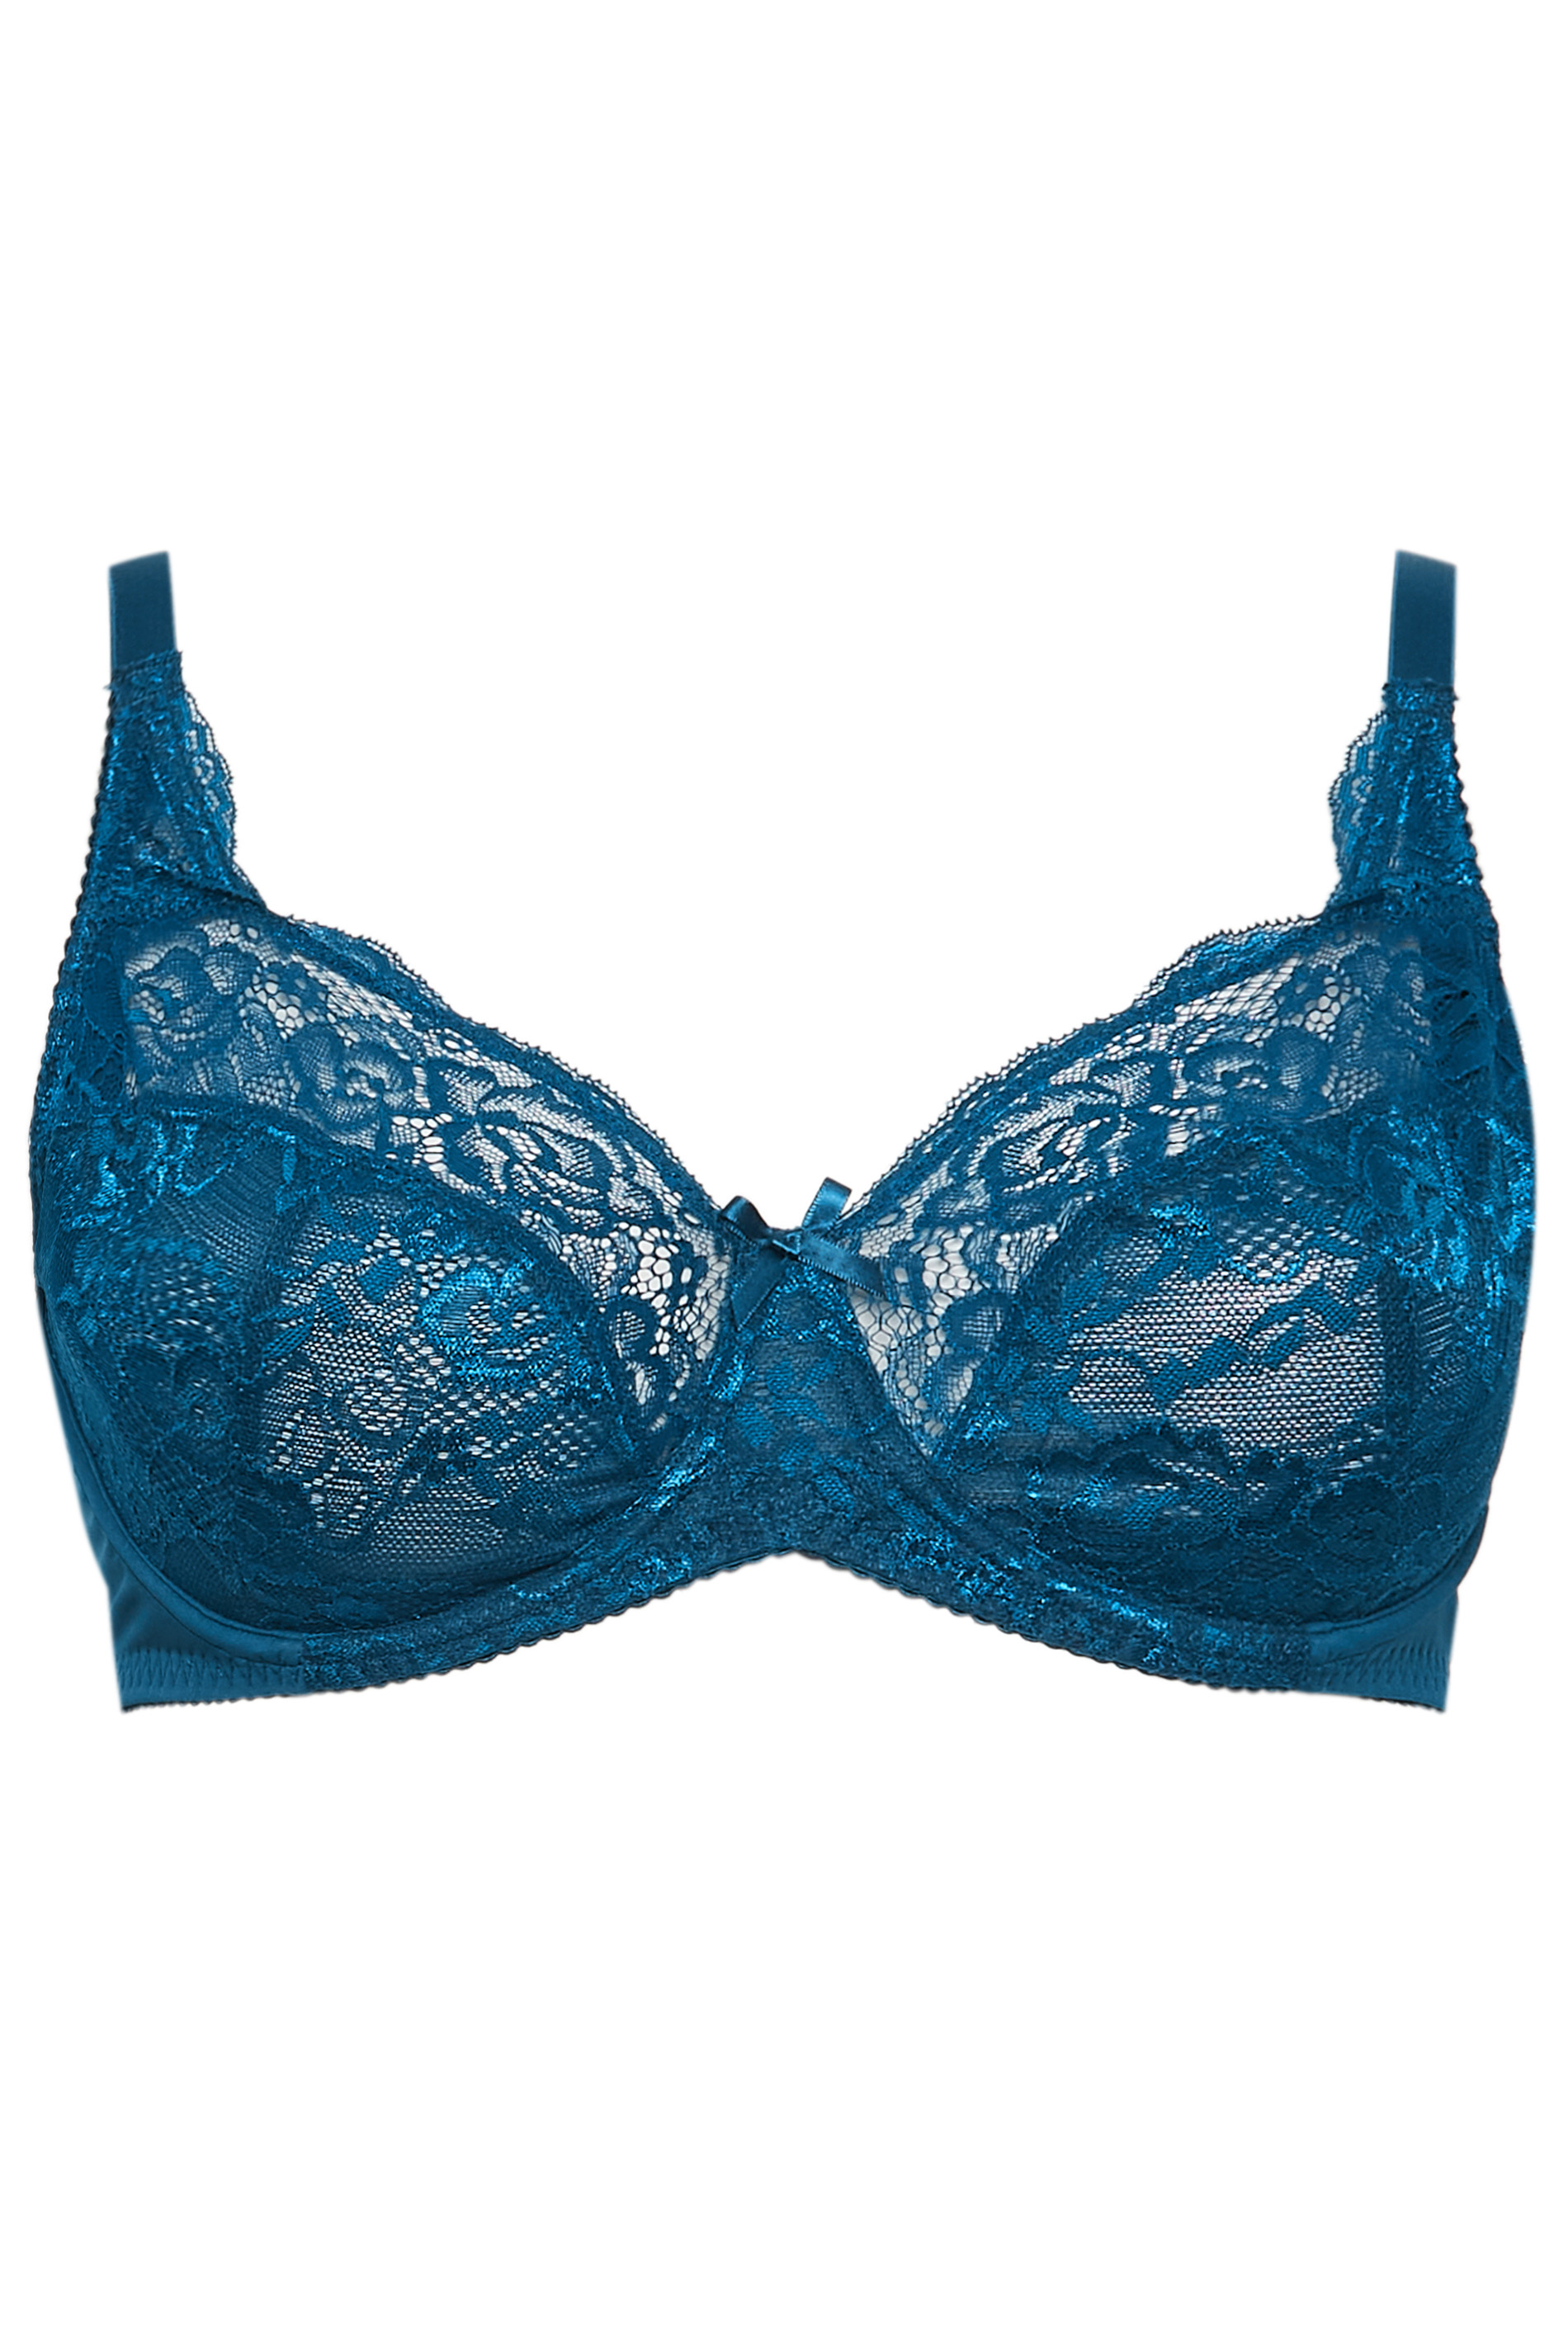 We Are We Wear geo lace non padded balconette bra in green